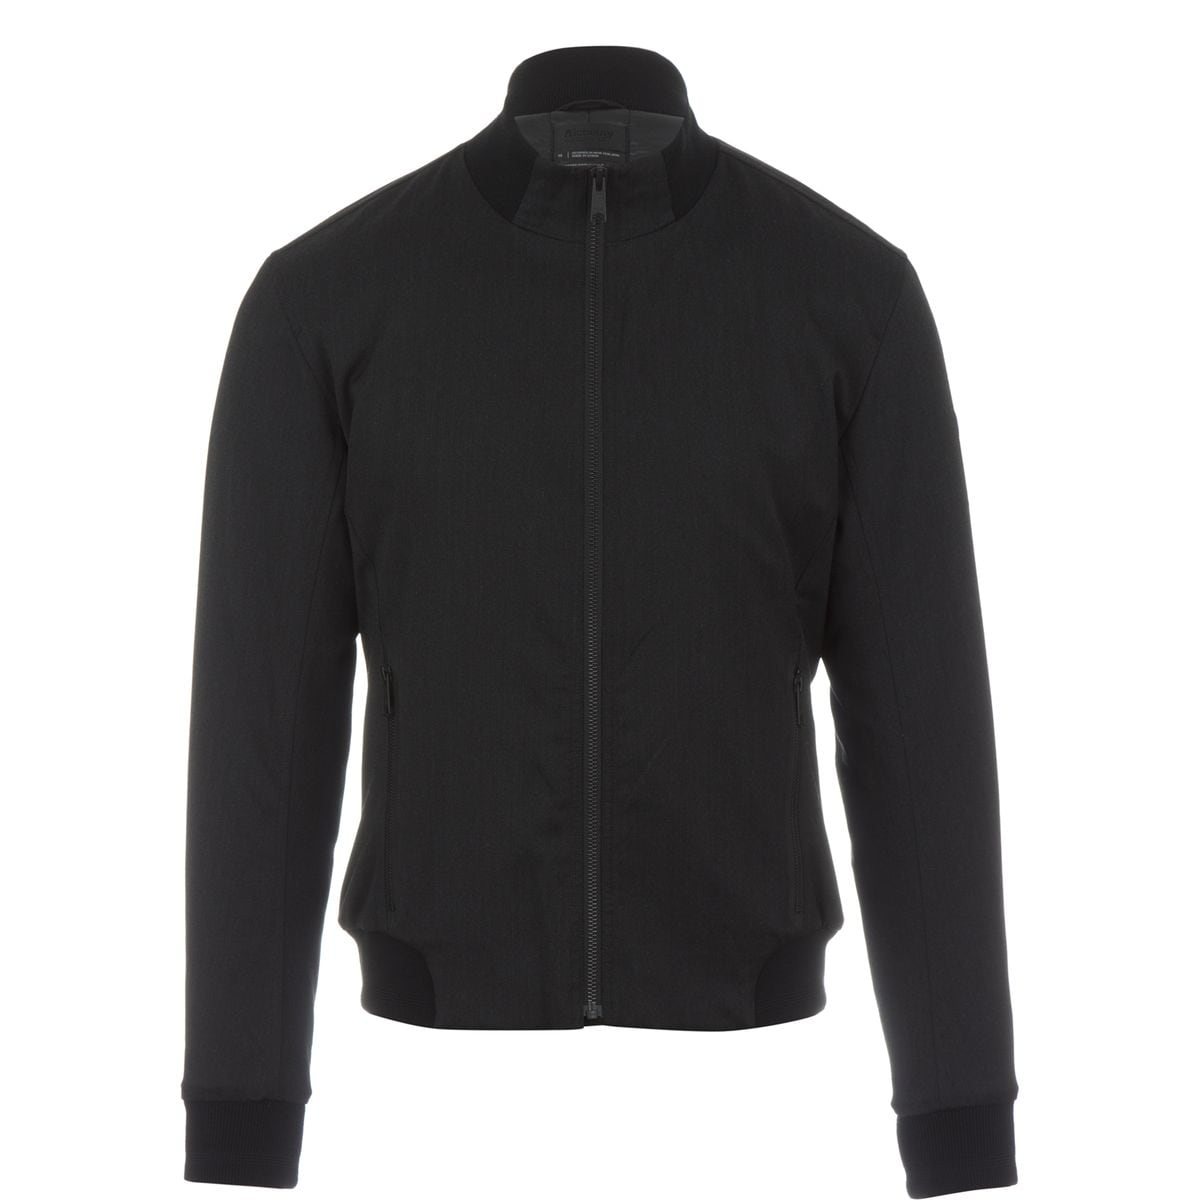 Mens - Synthetic Insulation Jackets